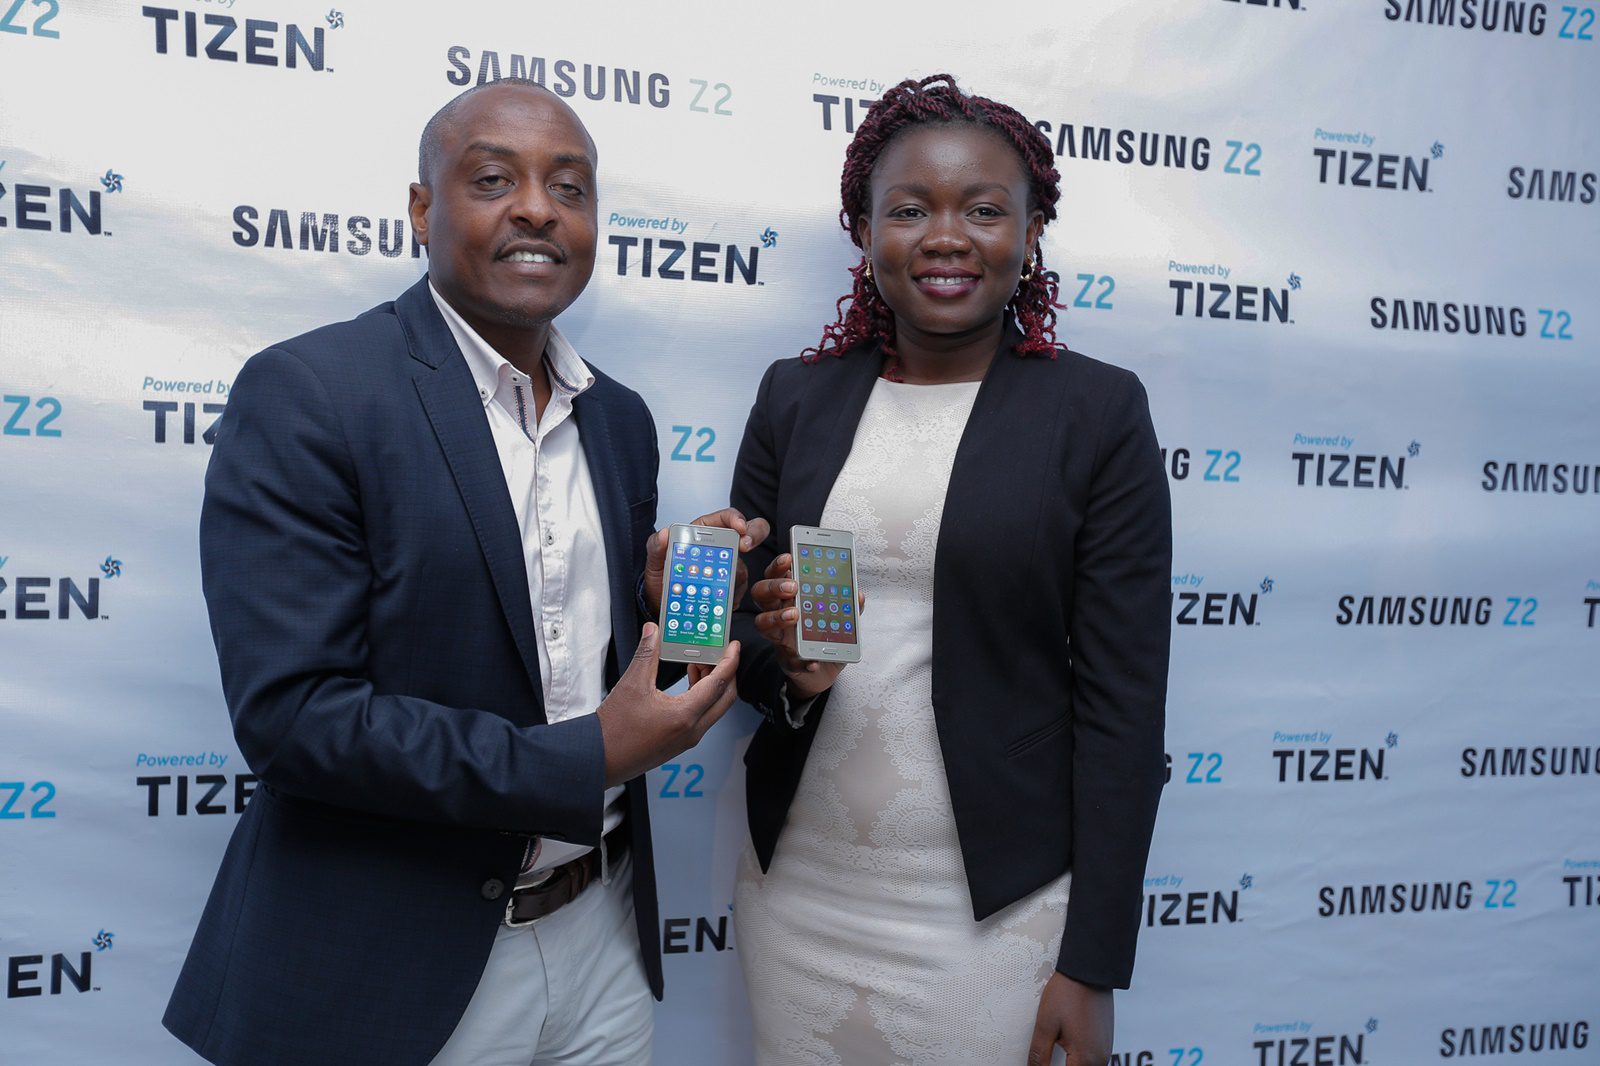 Samsung Electronics East Africa Mobile and IT Head Simon Kariithi and Product Manager Idda Rasanga pose with the device during the launch at Samsung's Nairobi offices